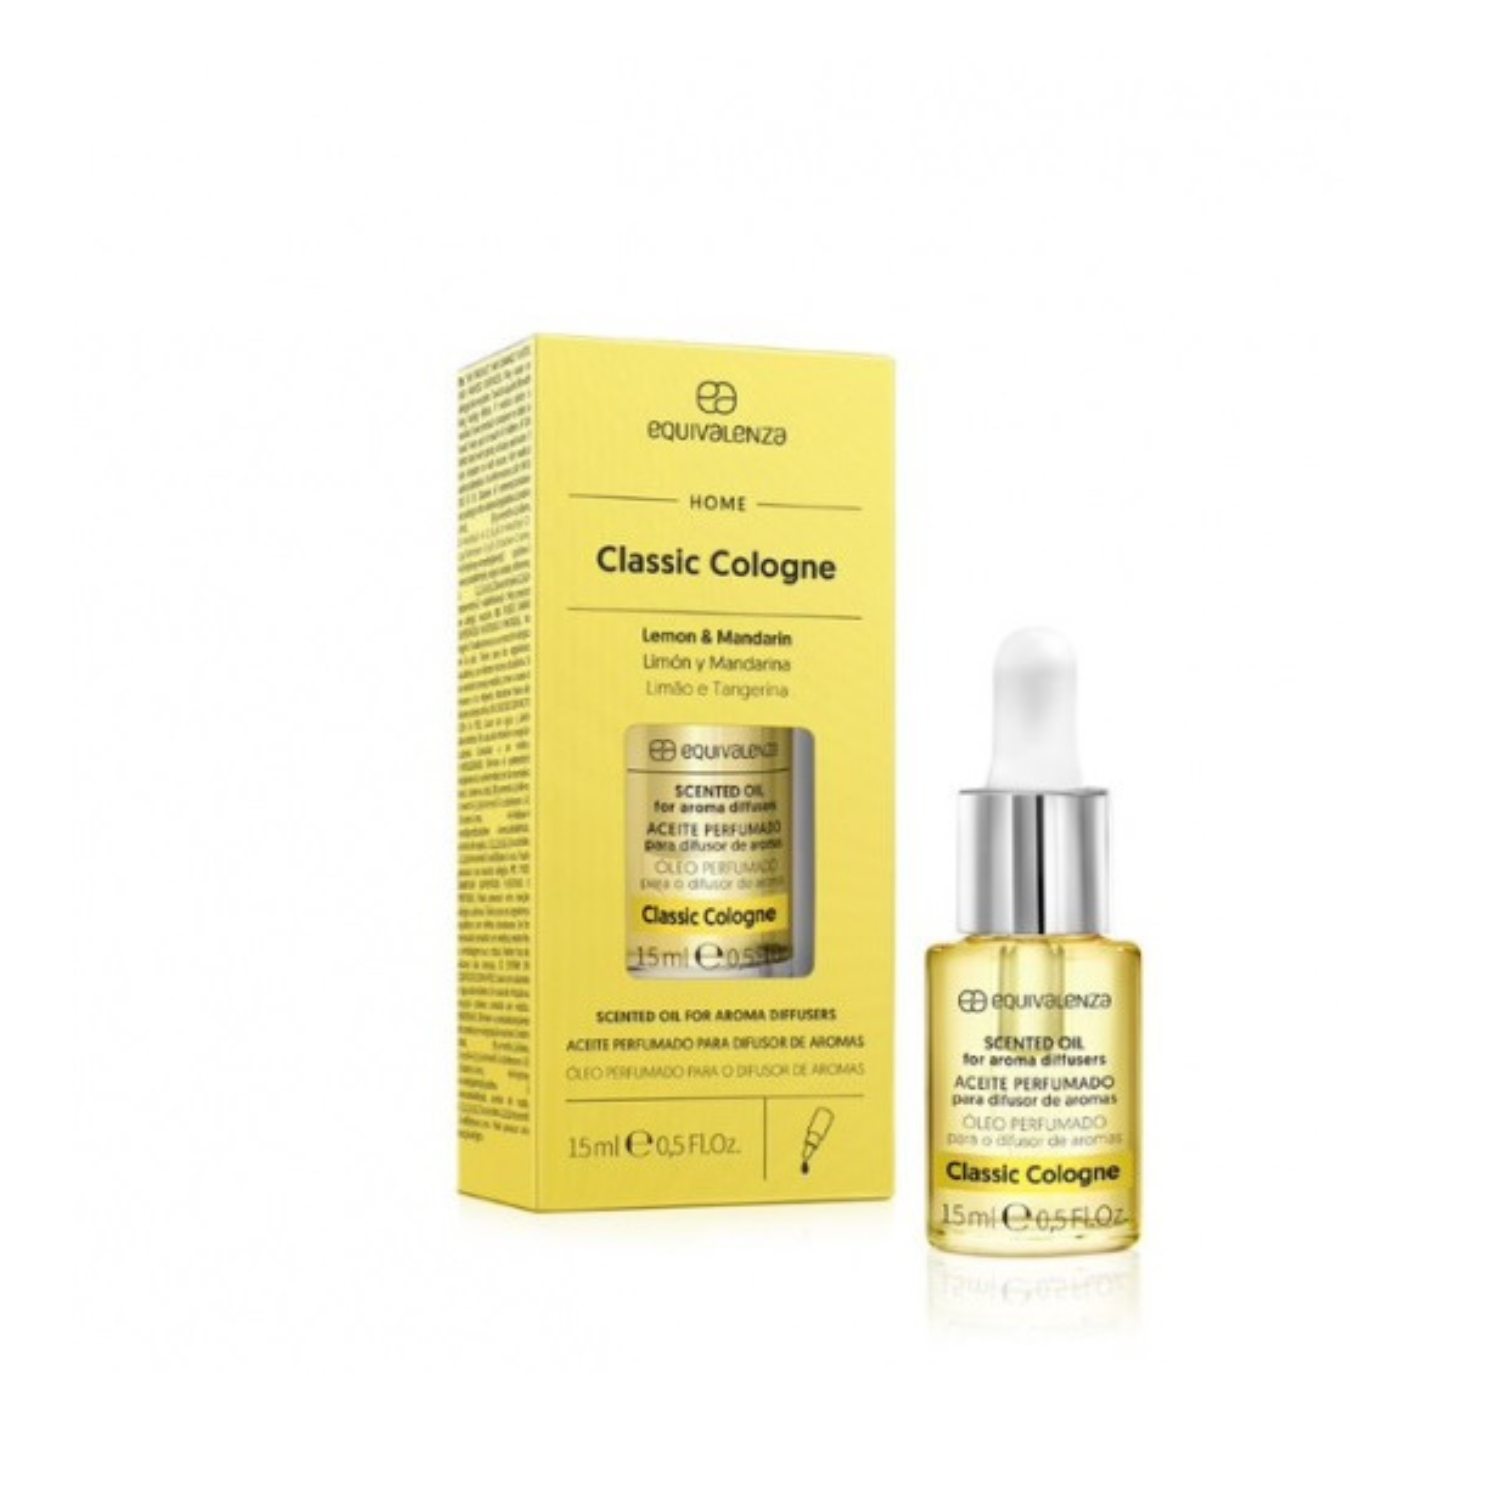 Ulei parfumat solubil in apa Classic Cologne, 15 ml, Equivalenza